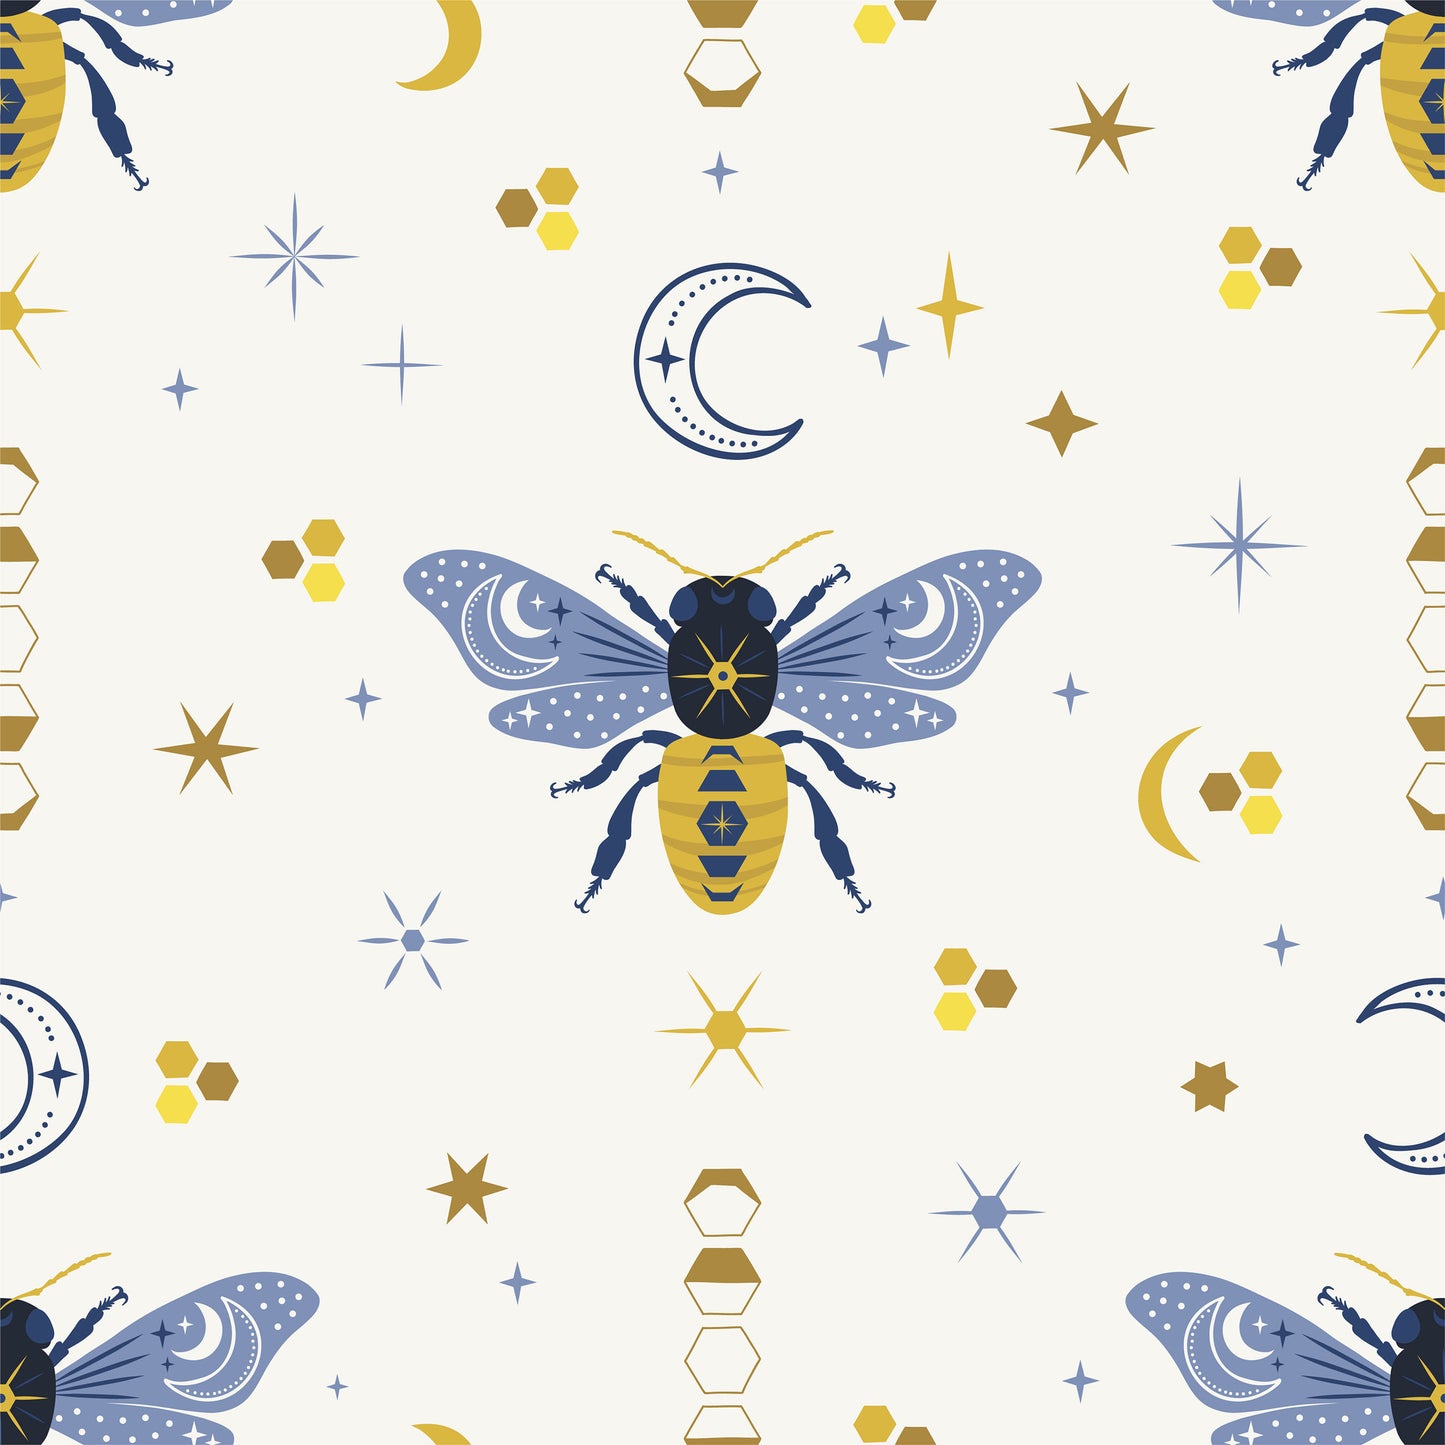 Cute Blue and yellow honeybee and crescent moon pattern on white background easy to install and remove peel and stick custom wallpaper available in different lengths/sizes locally created and printed in Canada Artichoke wallpaper. Washable, durable, commercial grade, removable and waterproof.